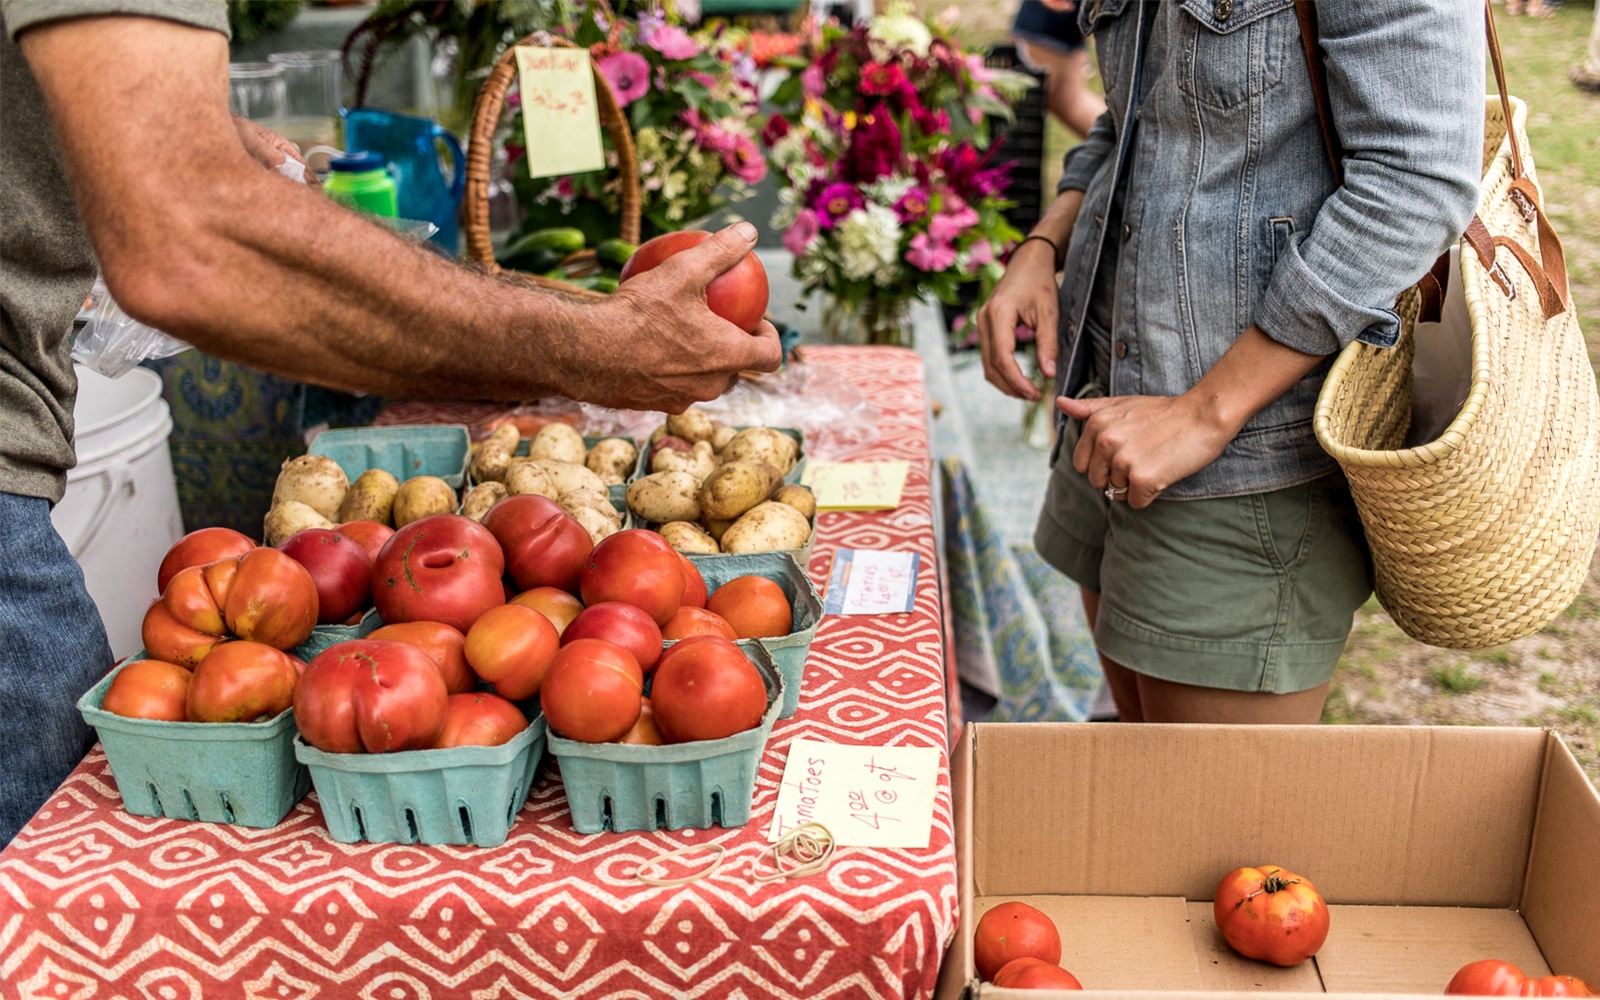 How to build a dinner from the Farmer's Market on The Fresh Exchange.